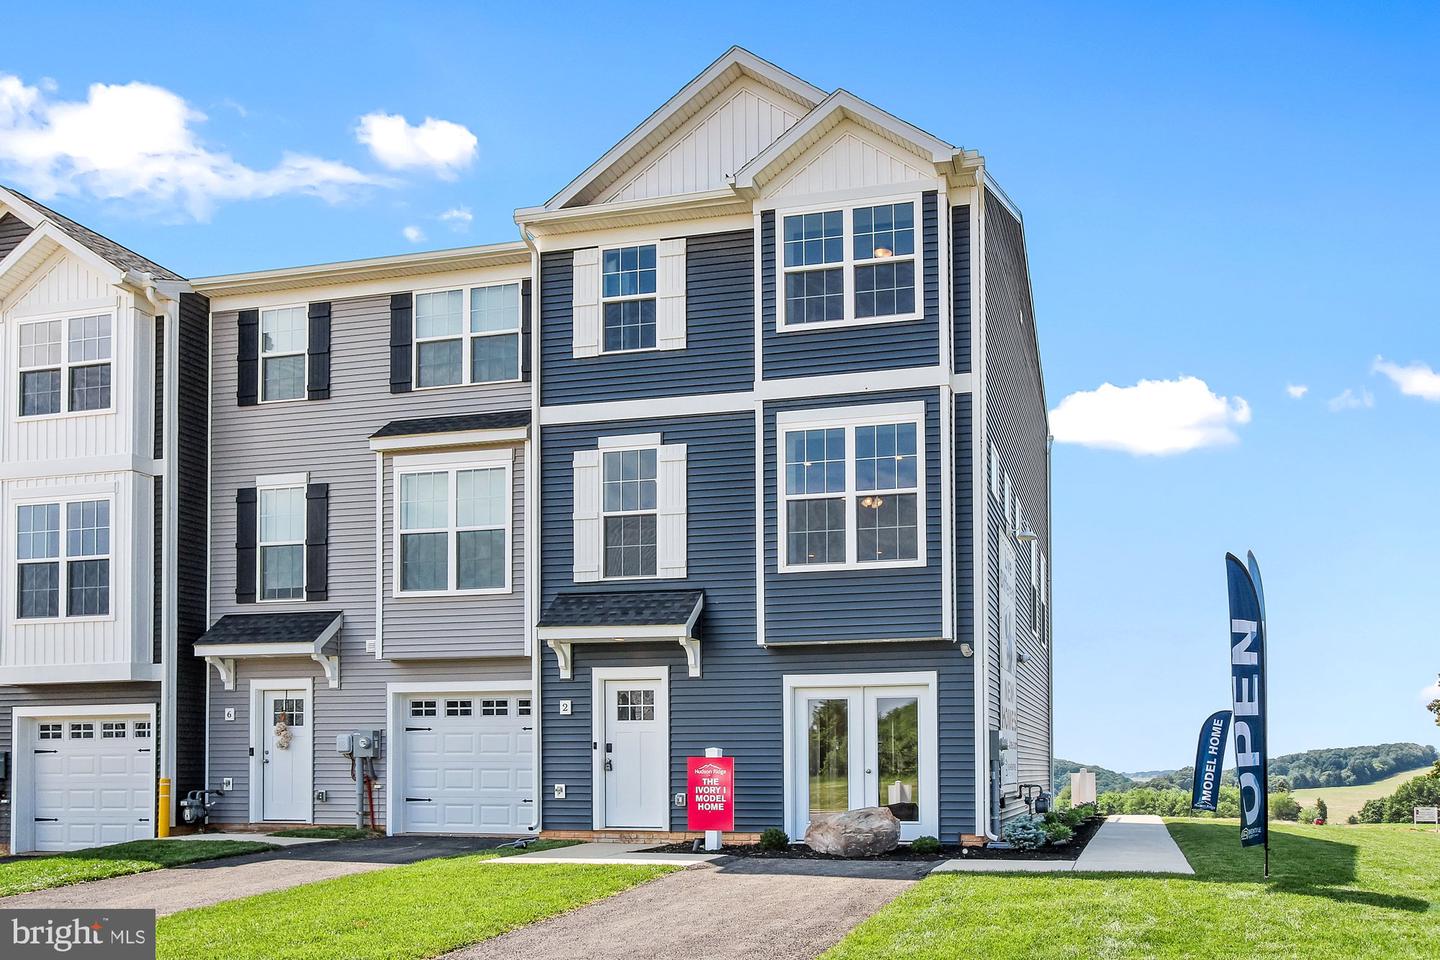 View Red Lion, PA 17356 townhome